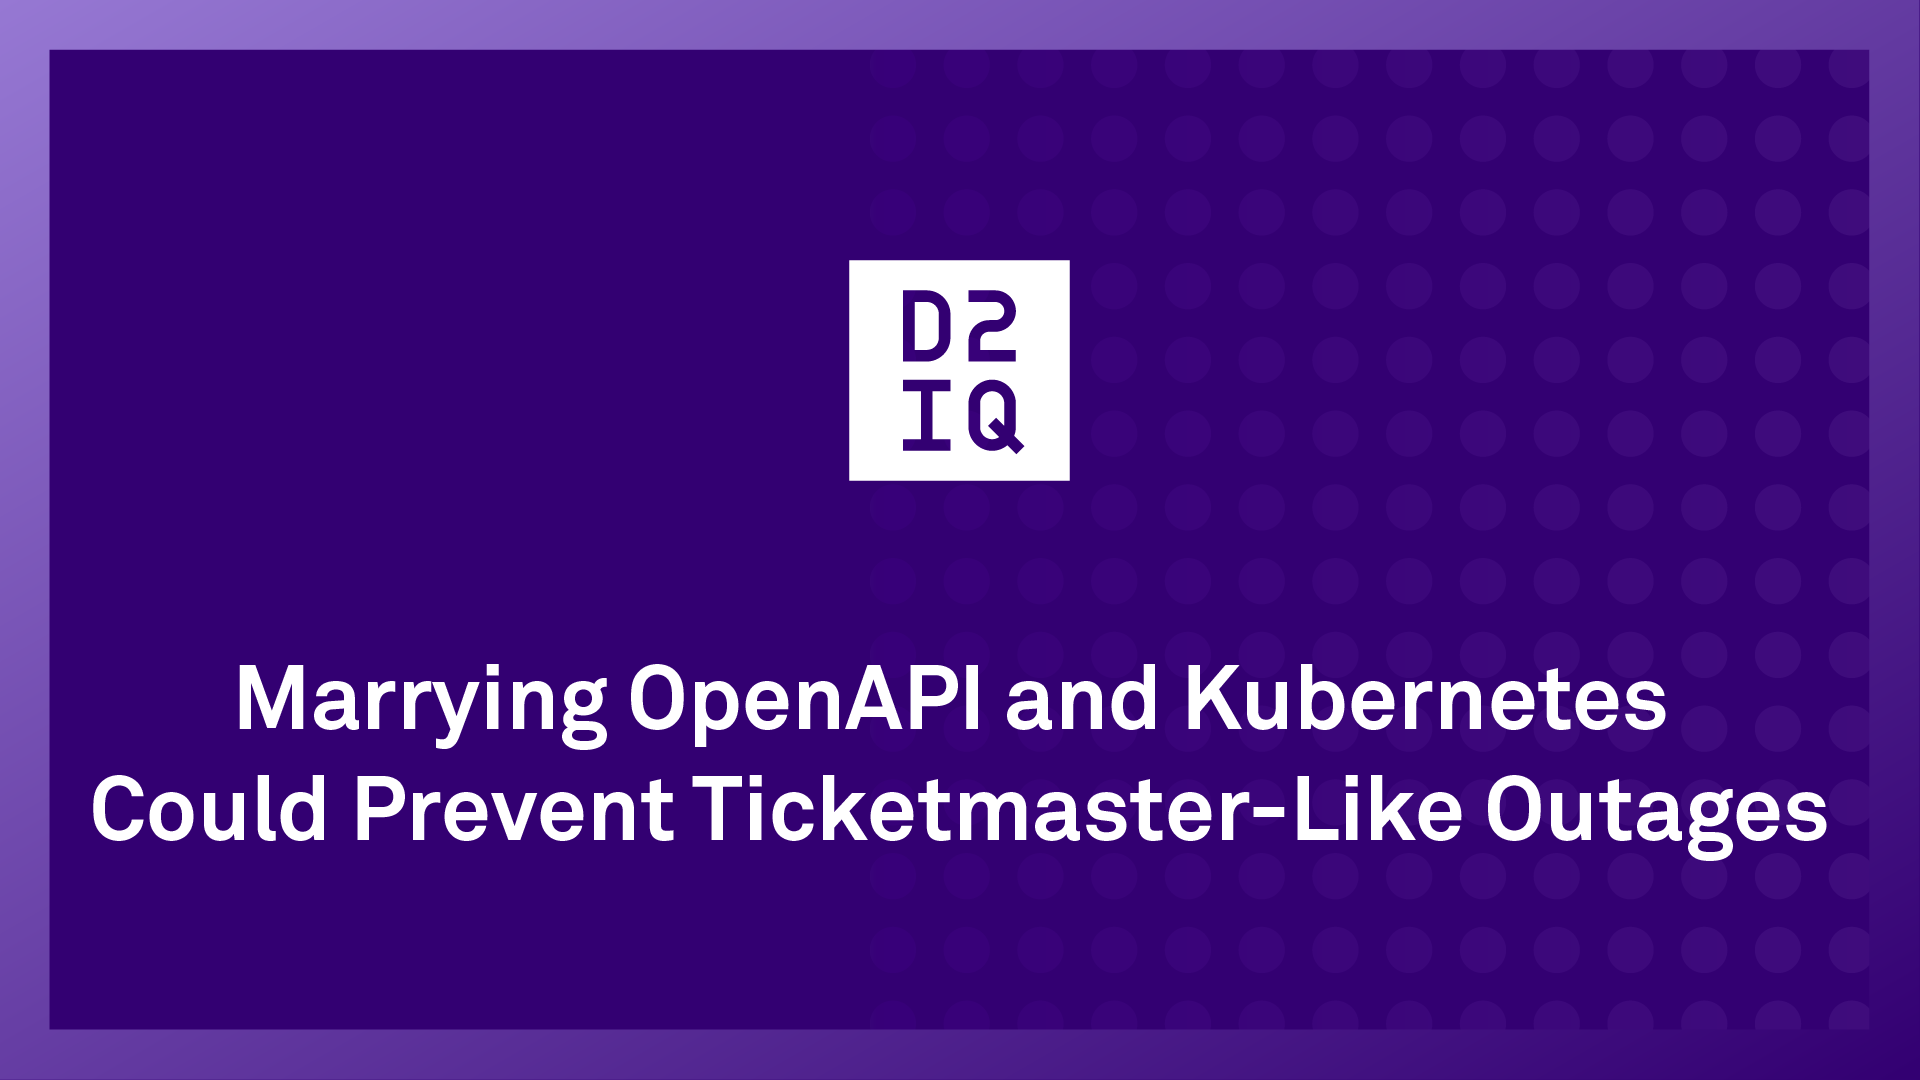 OpenAPI & Kubernetes to Prevent Ticketmaster-Like Outages | D2iQ